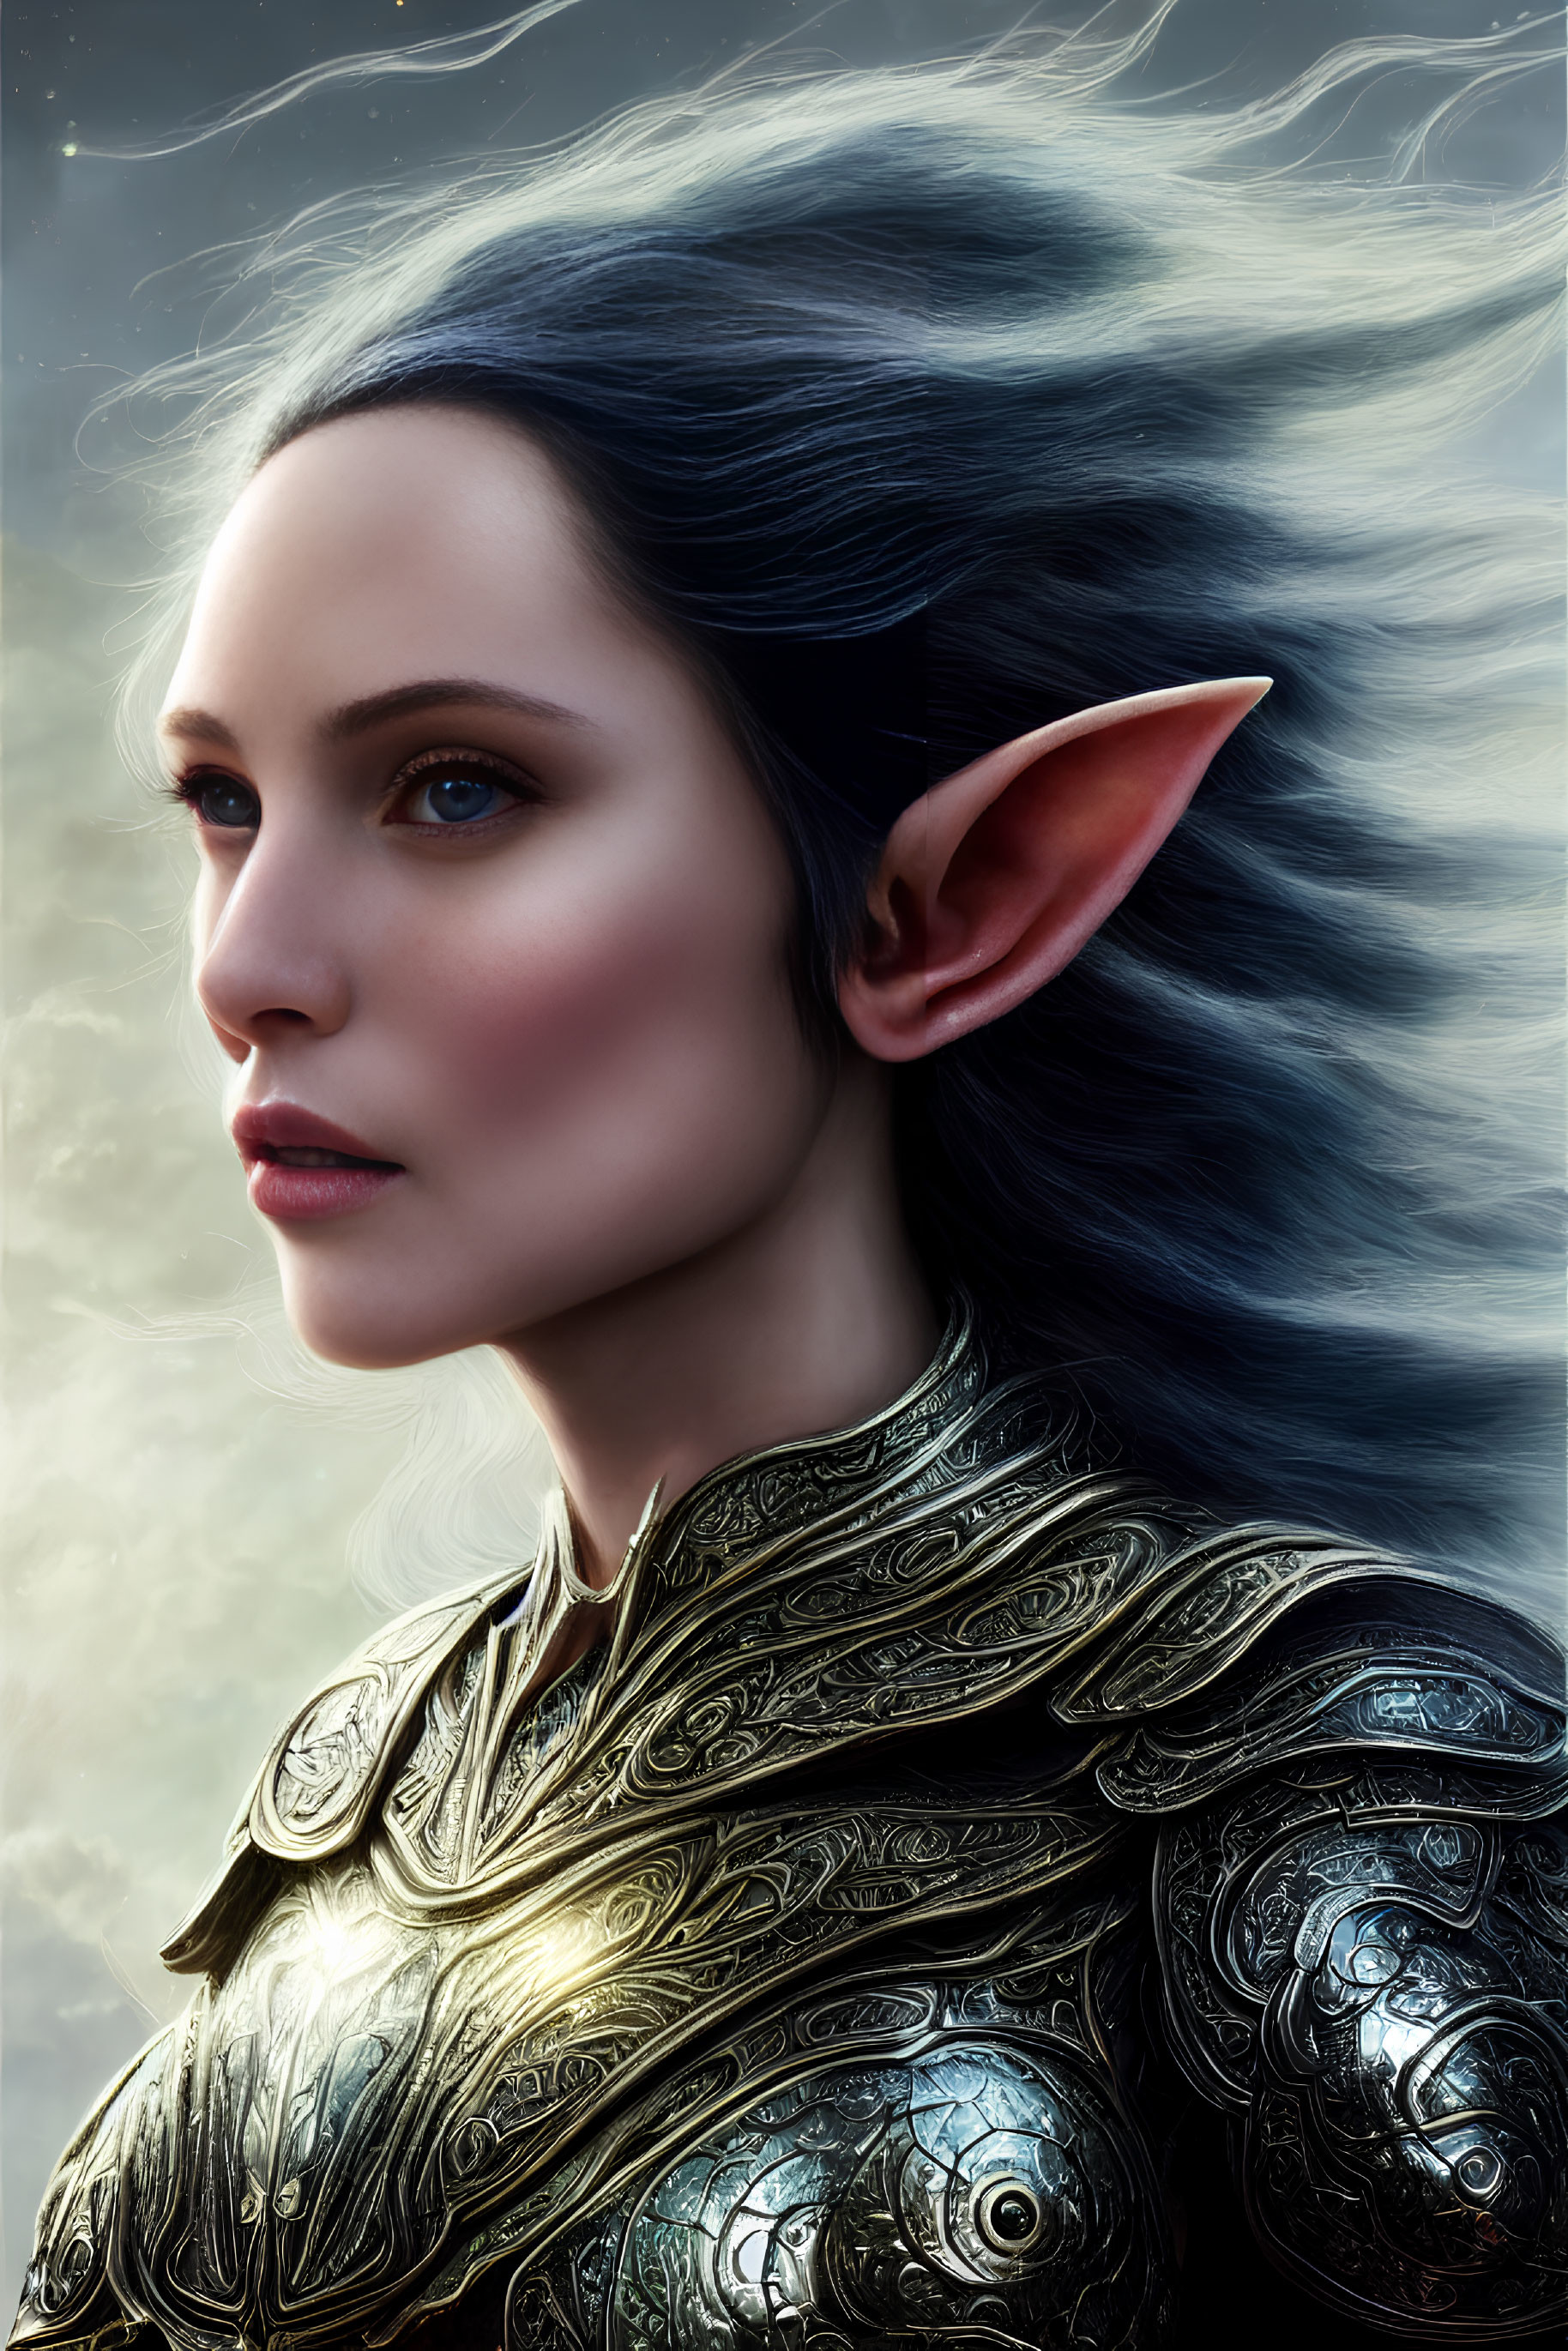 Elf portrait in ornate armor with pale skin and dark hair